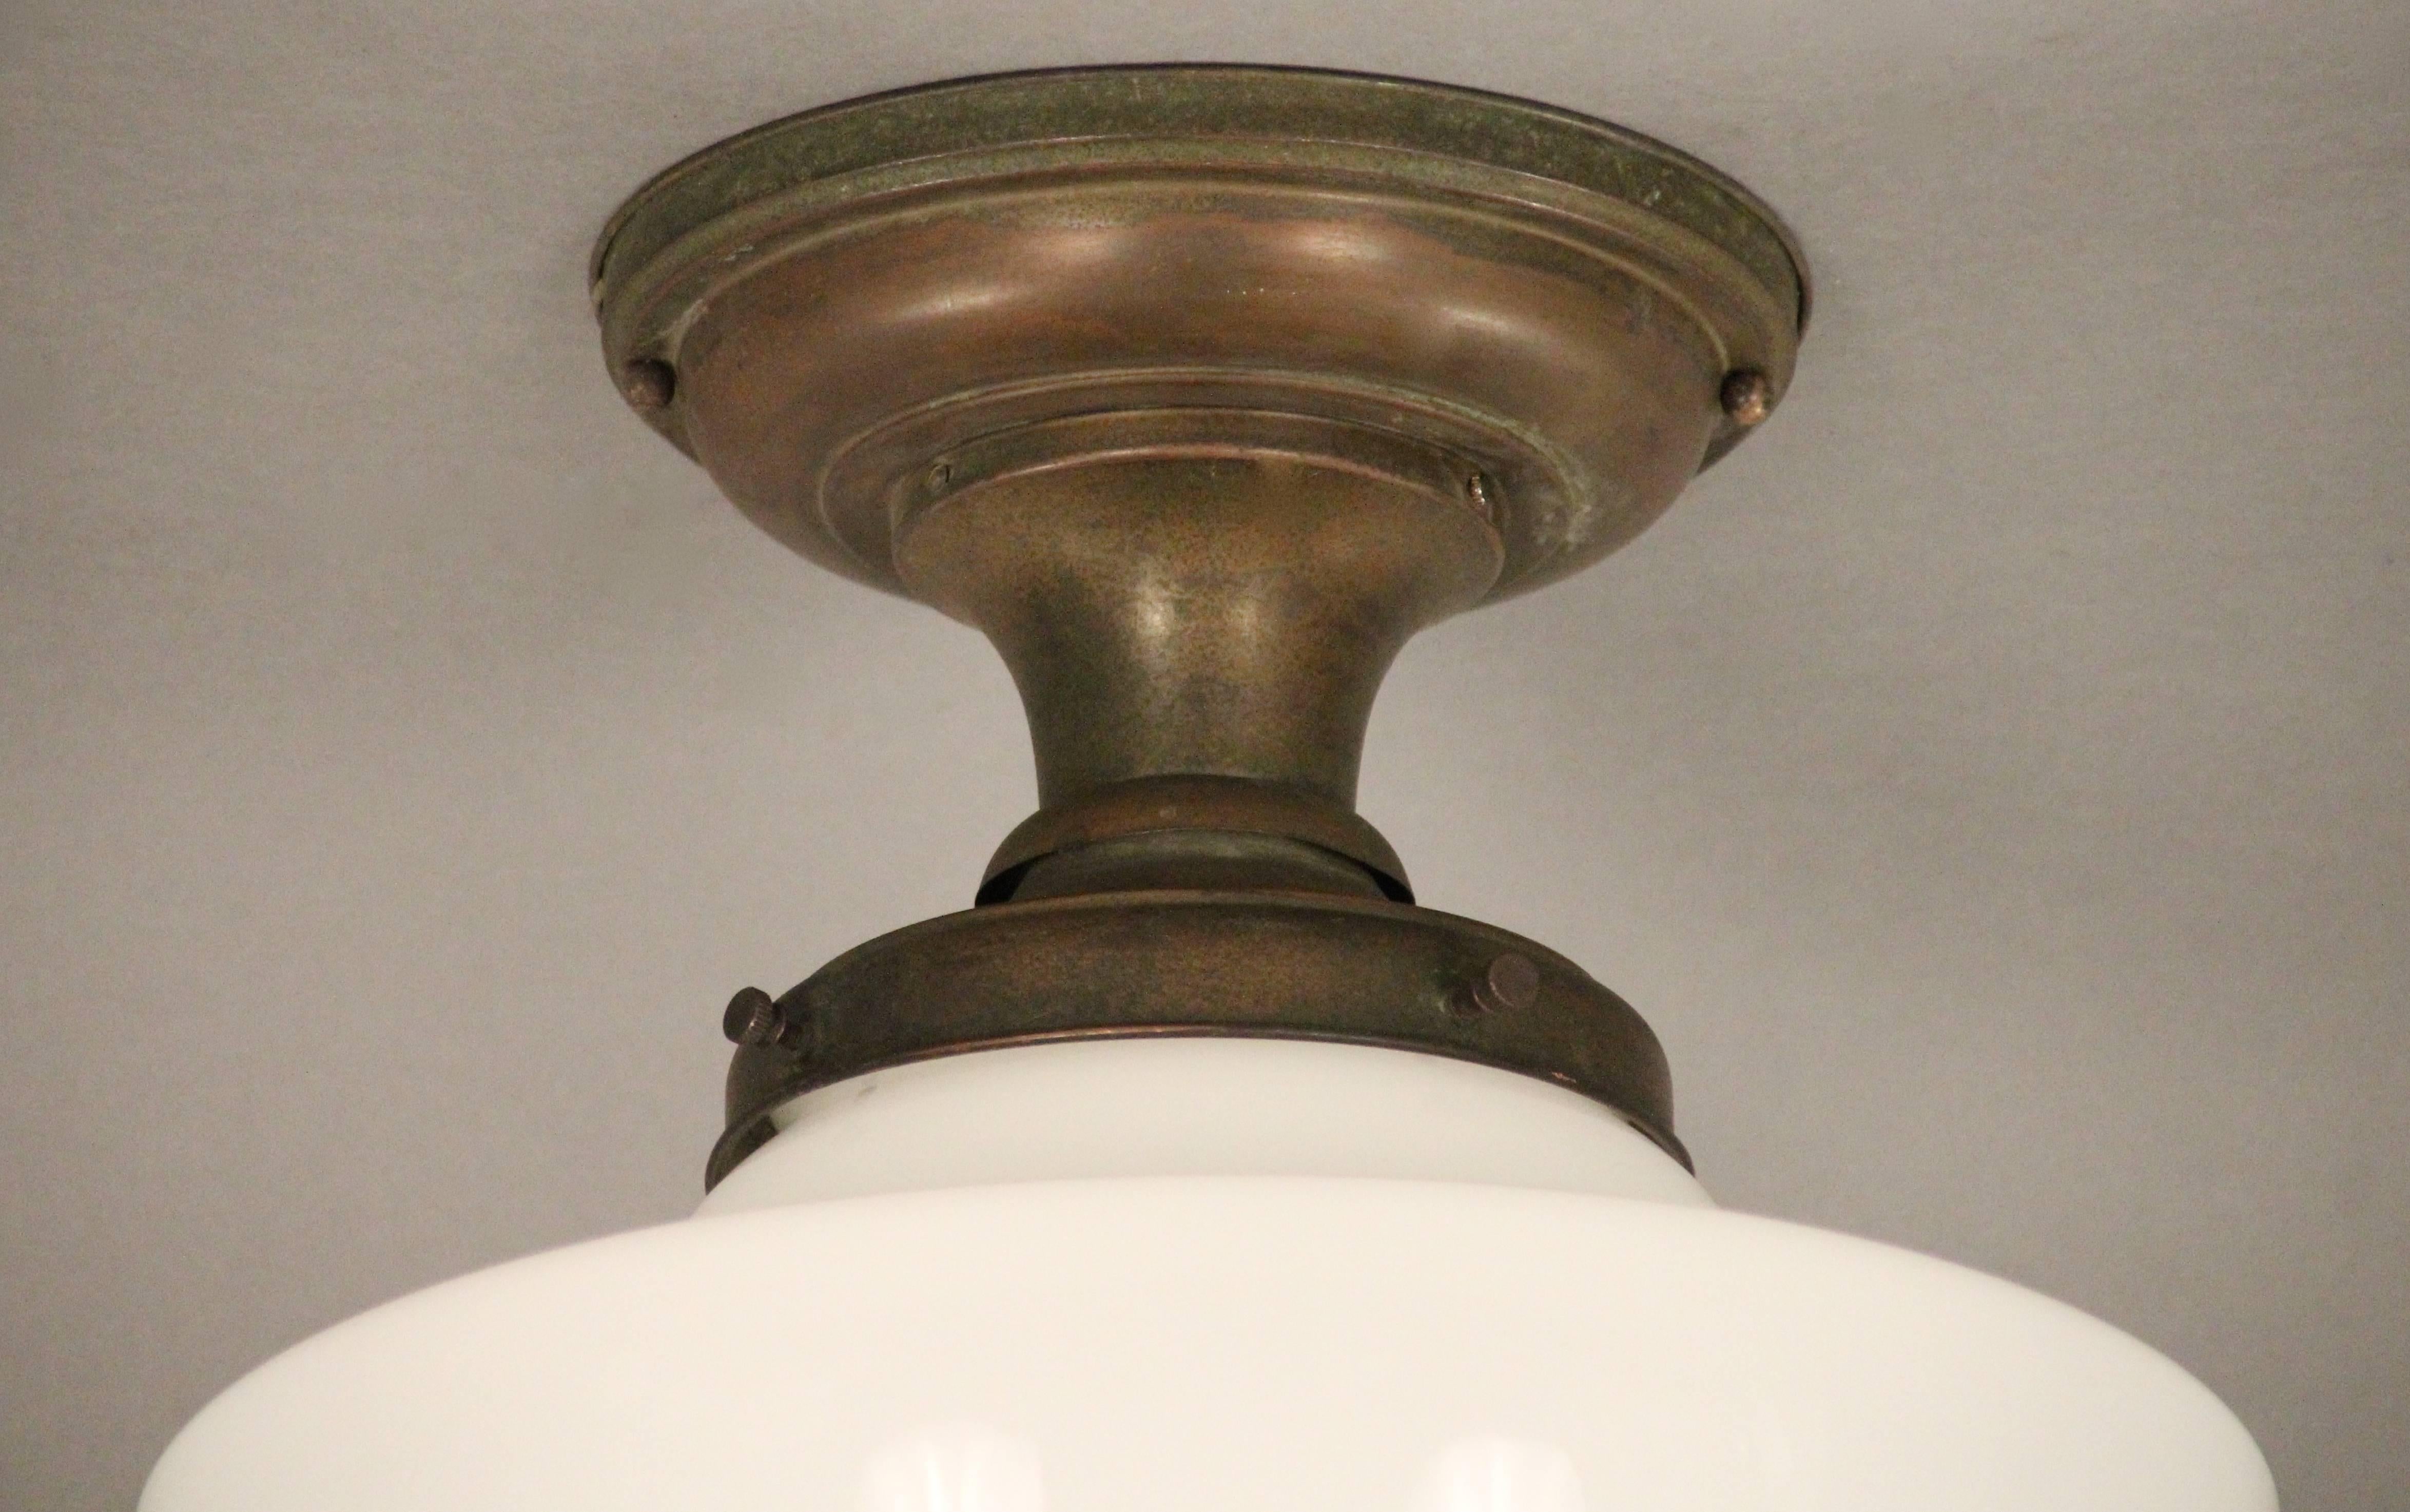 Ceiling mount with glass globe, circa 1930s.